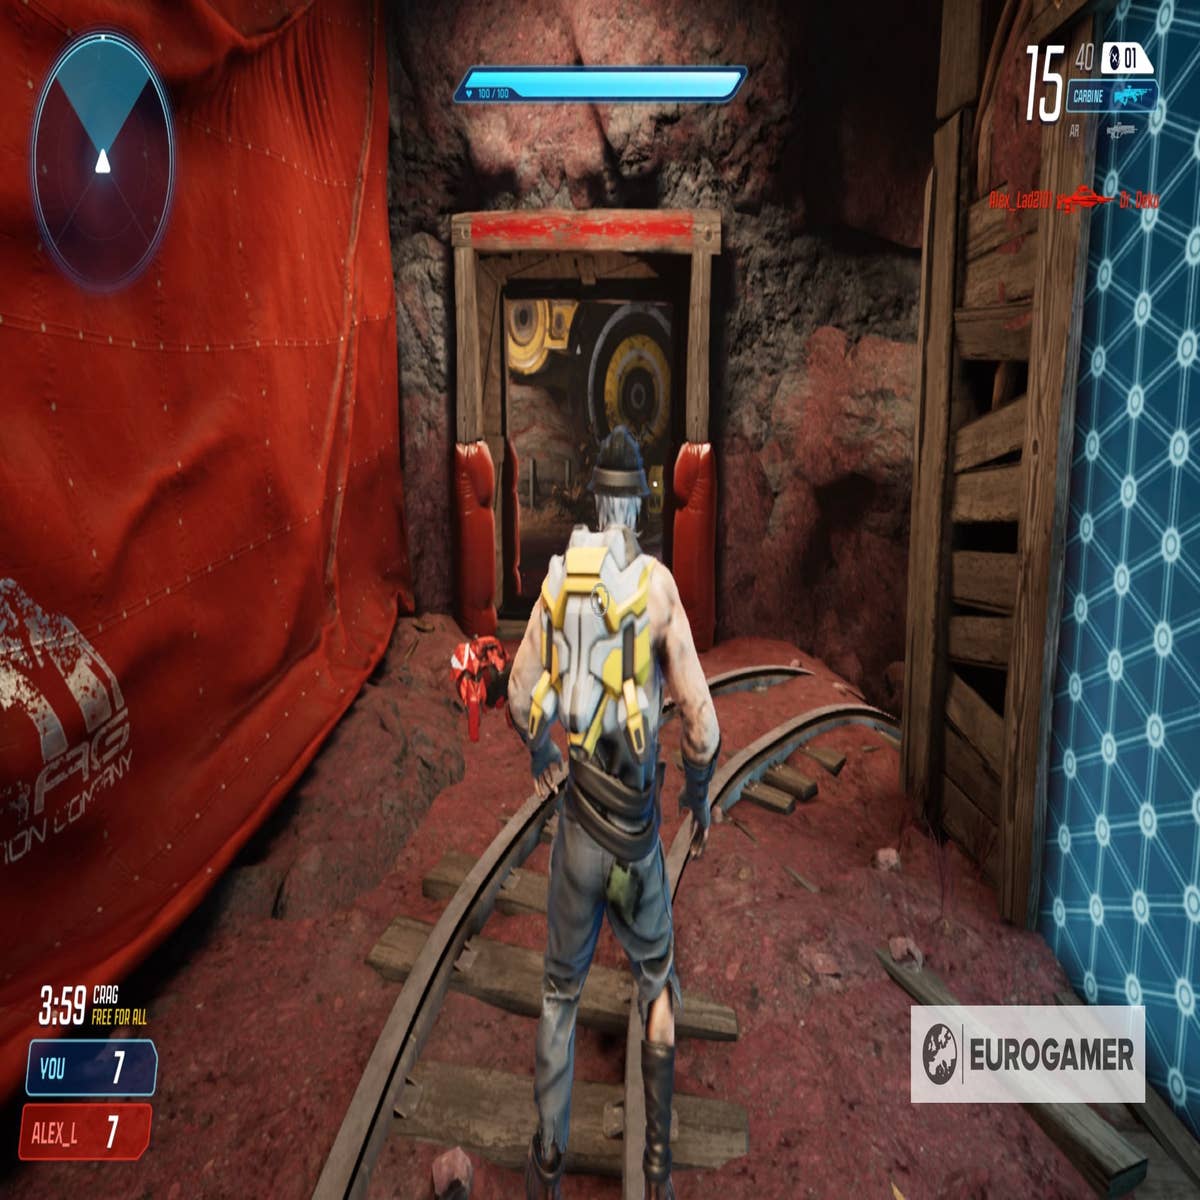 Competitive shooter Splitgate heads to console after years of Steam success